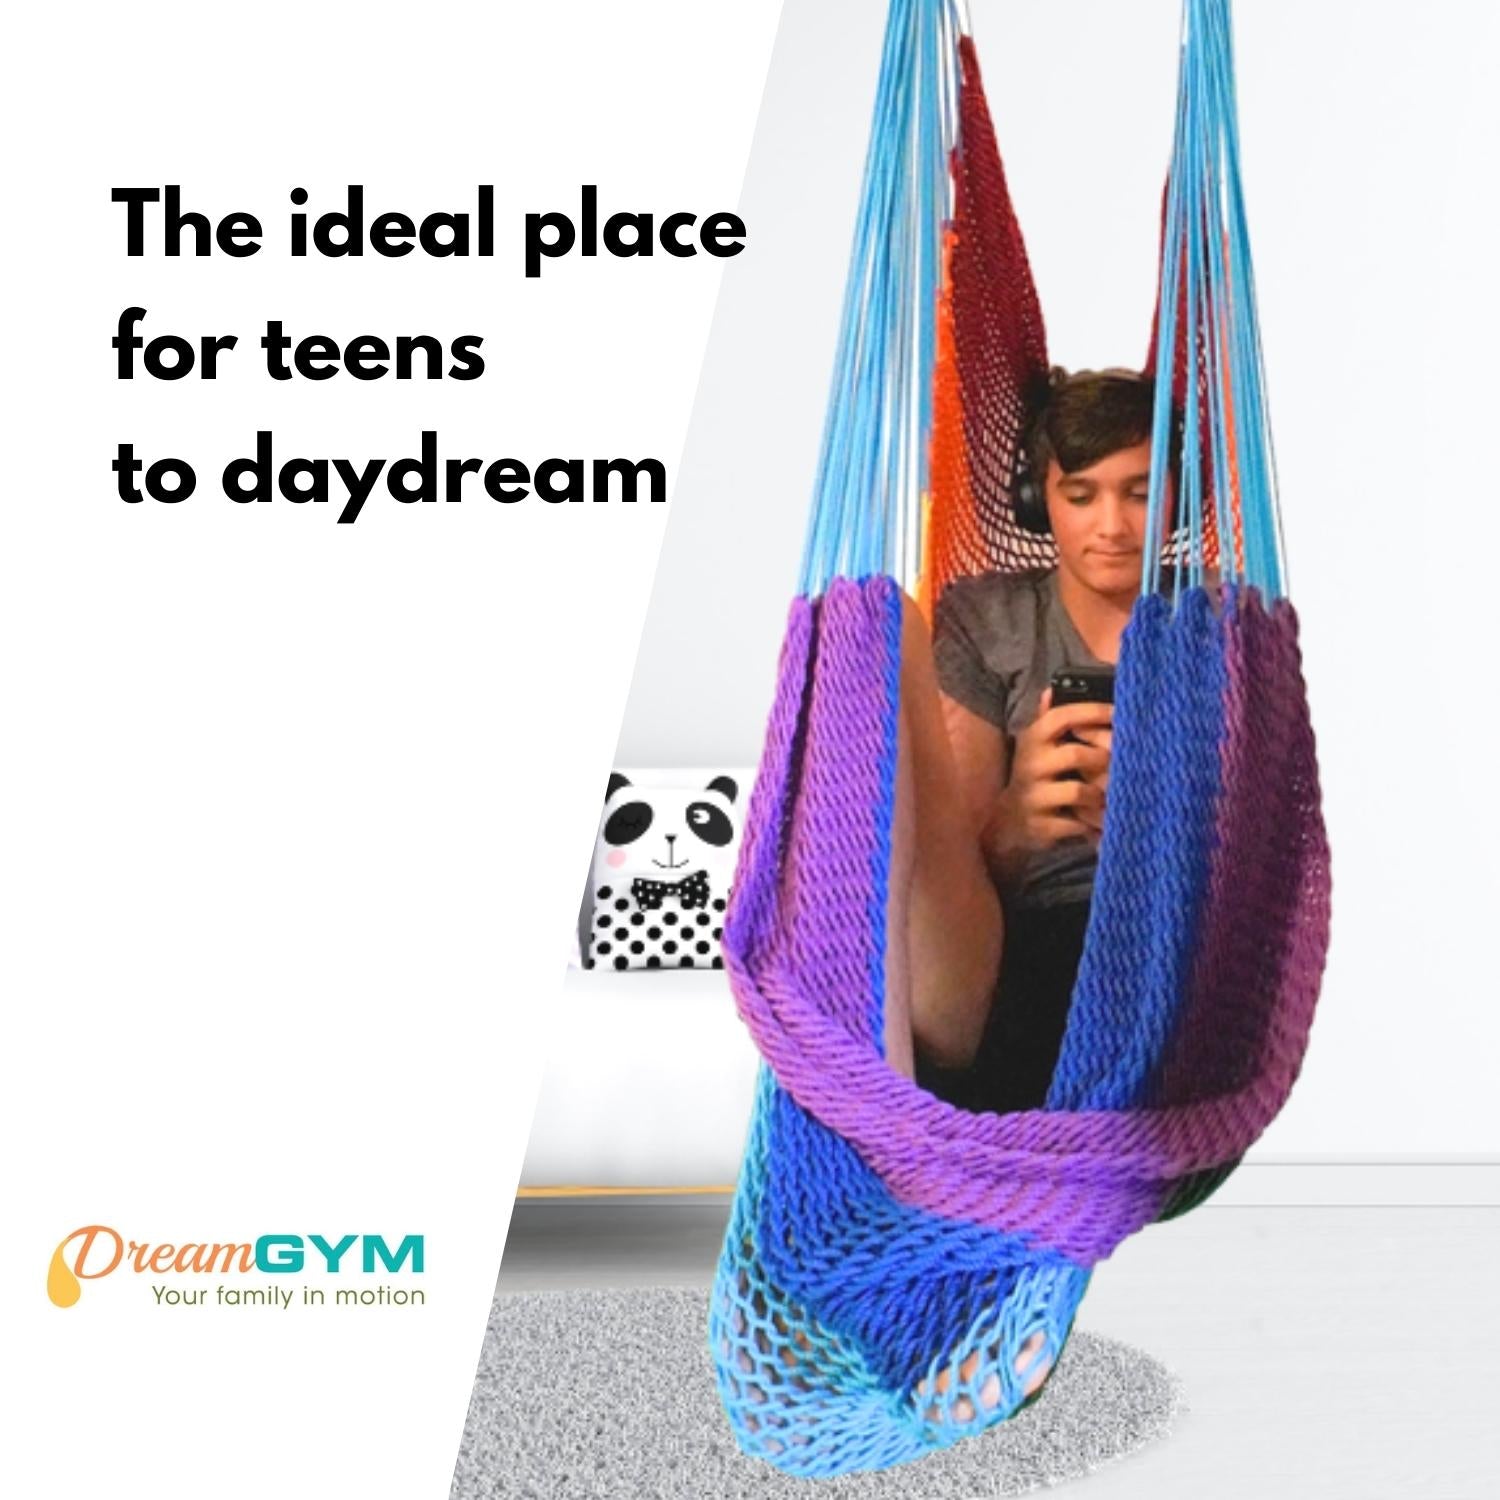 A teen boy is lounging in a hammock swing in headphones and his phone. It is an ideal place for teens to daydream.